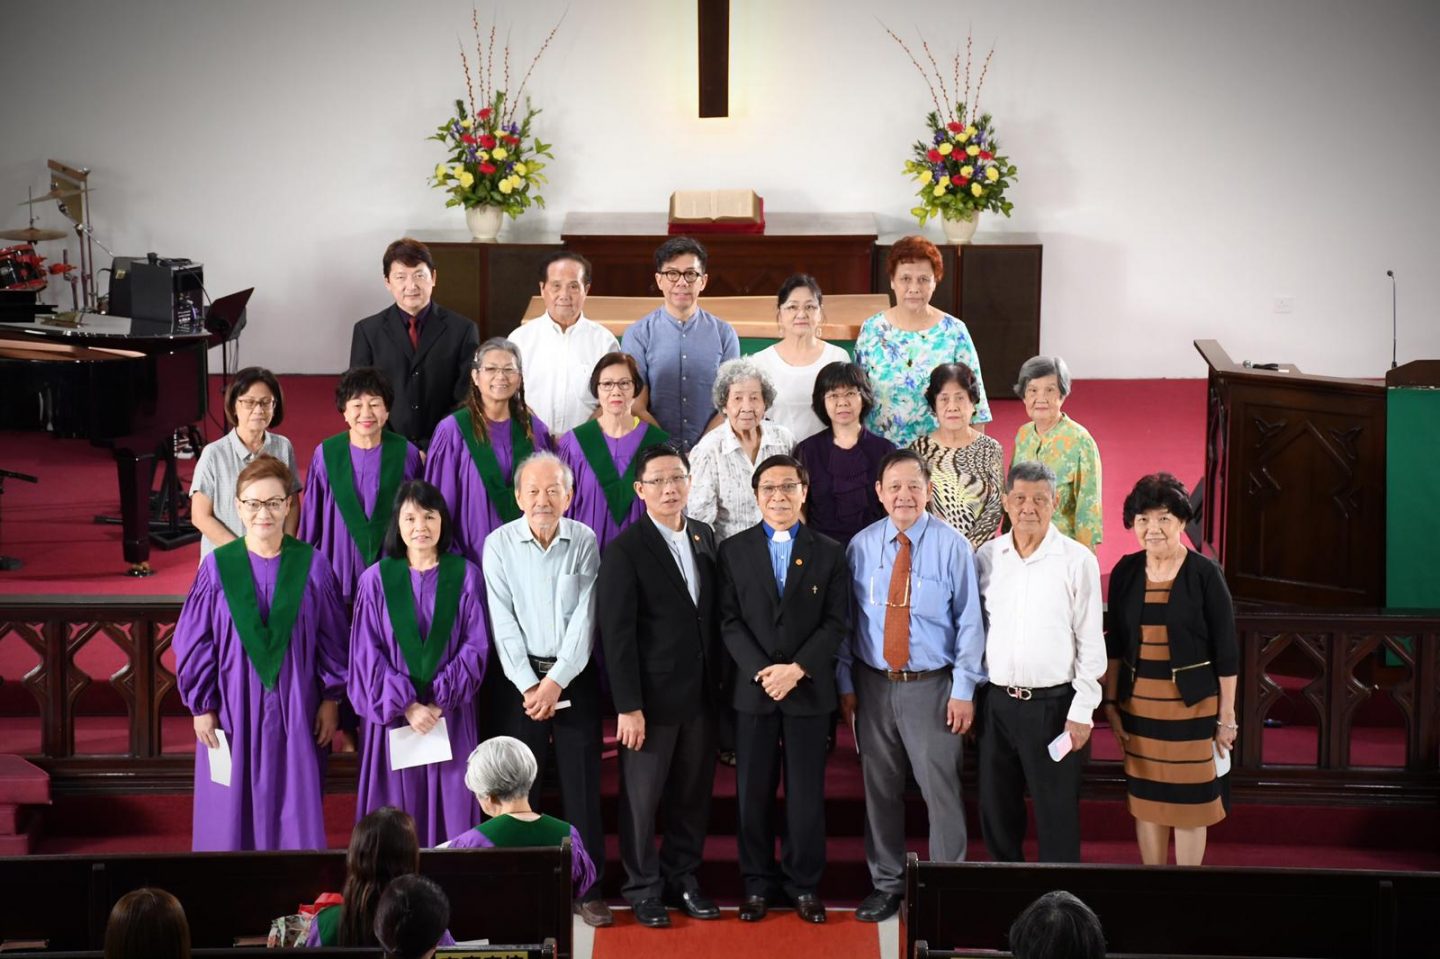 Reverend Dr David Koh (first row, fourth from right) together with the Senior Citizen Fellowship in Paya Lebar Chinese Methodist Church. Photo courtesy of Paya Lebar Chinese Methodist Church.